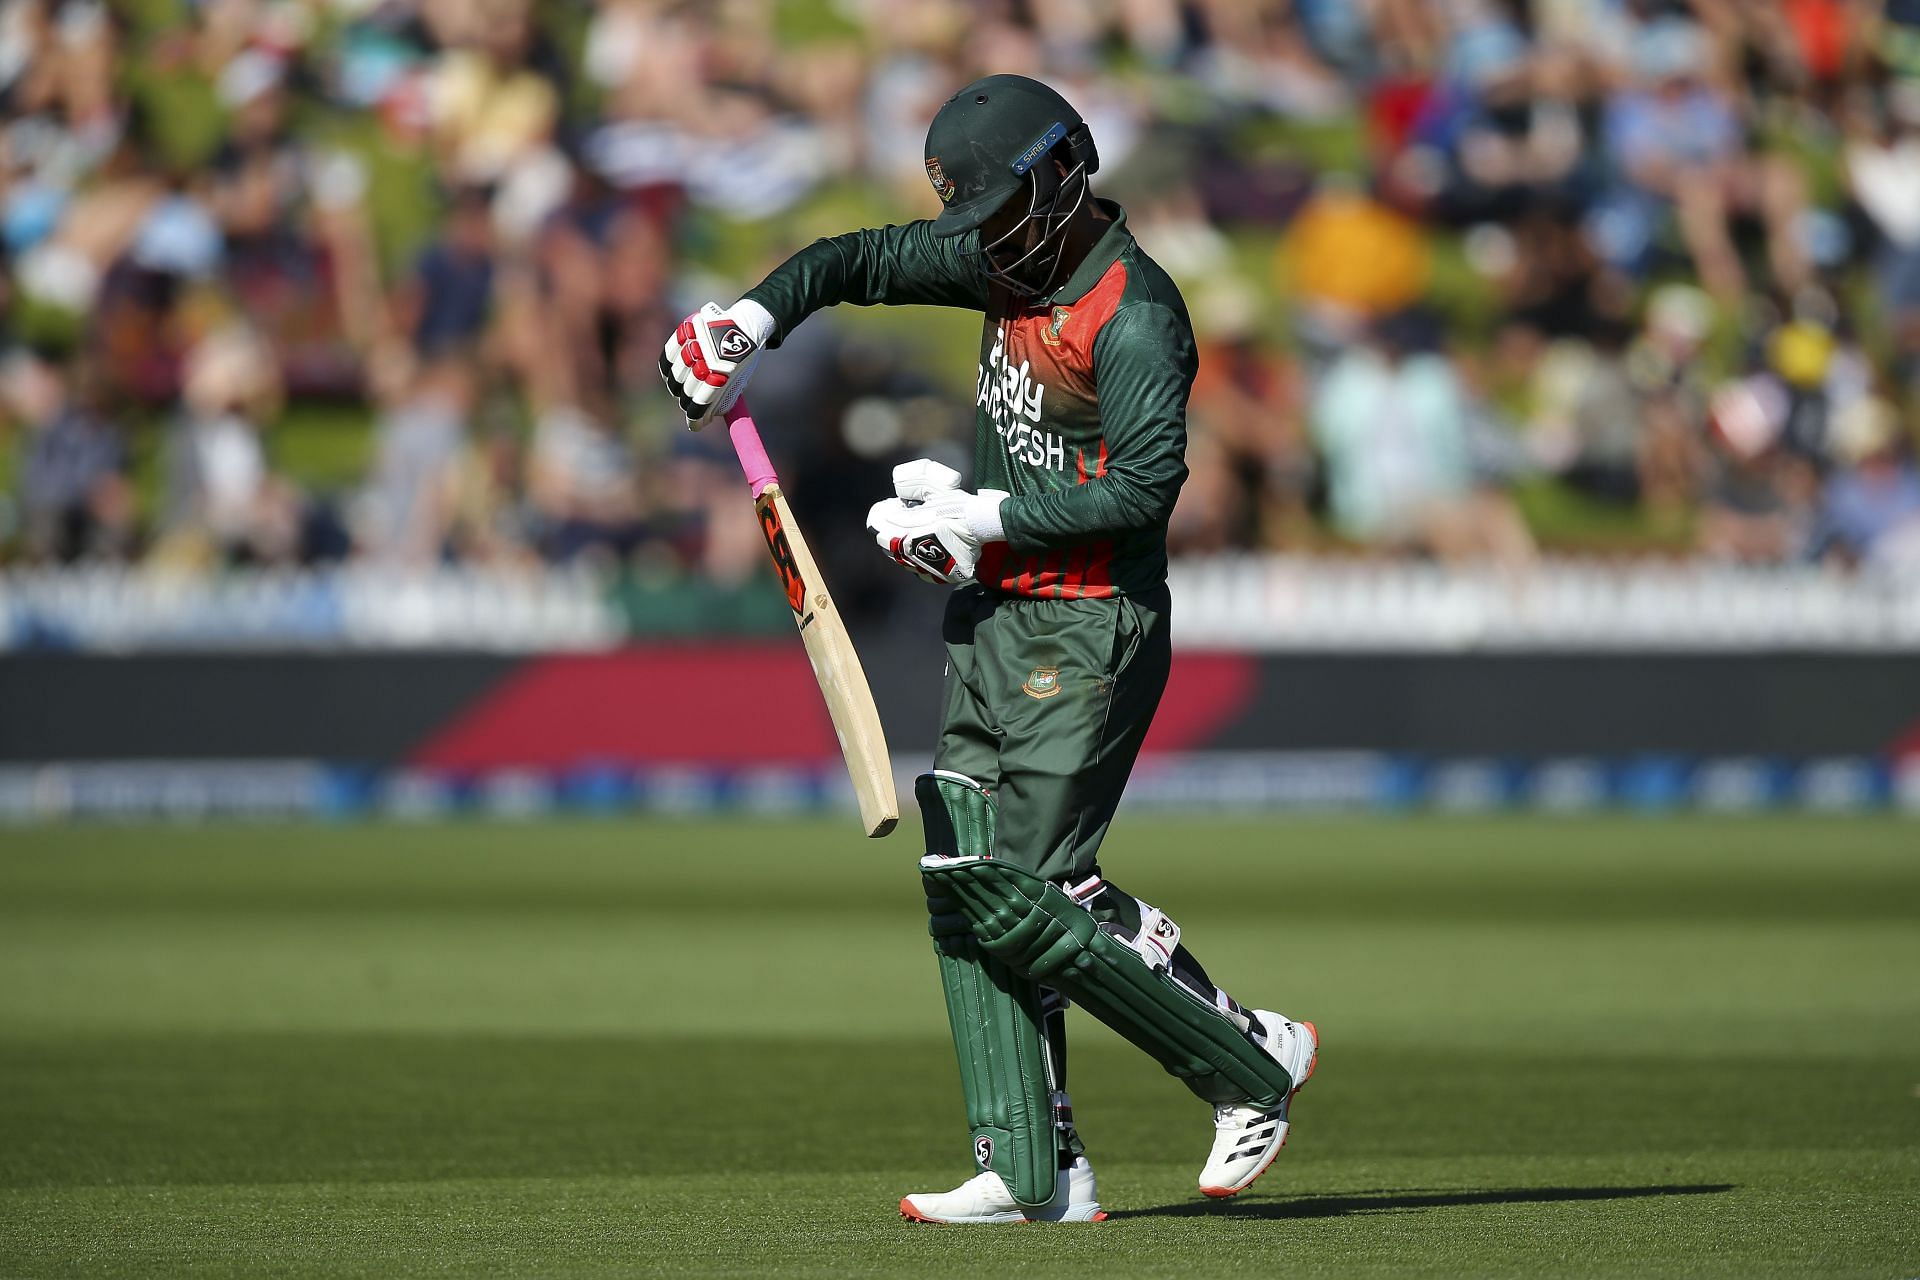 Tamim Iqbal vouched his support for ODI cricket